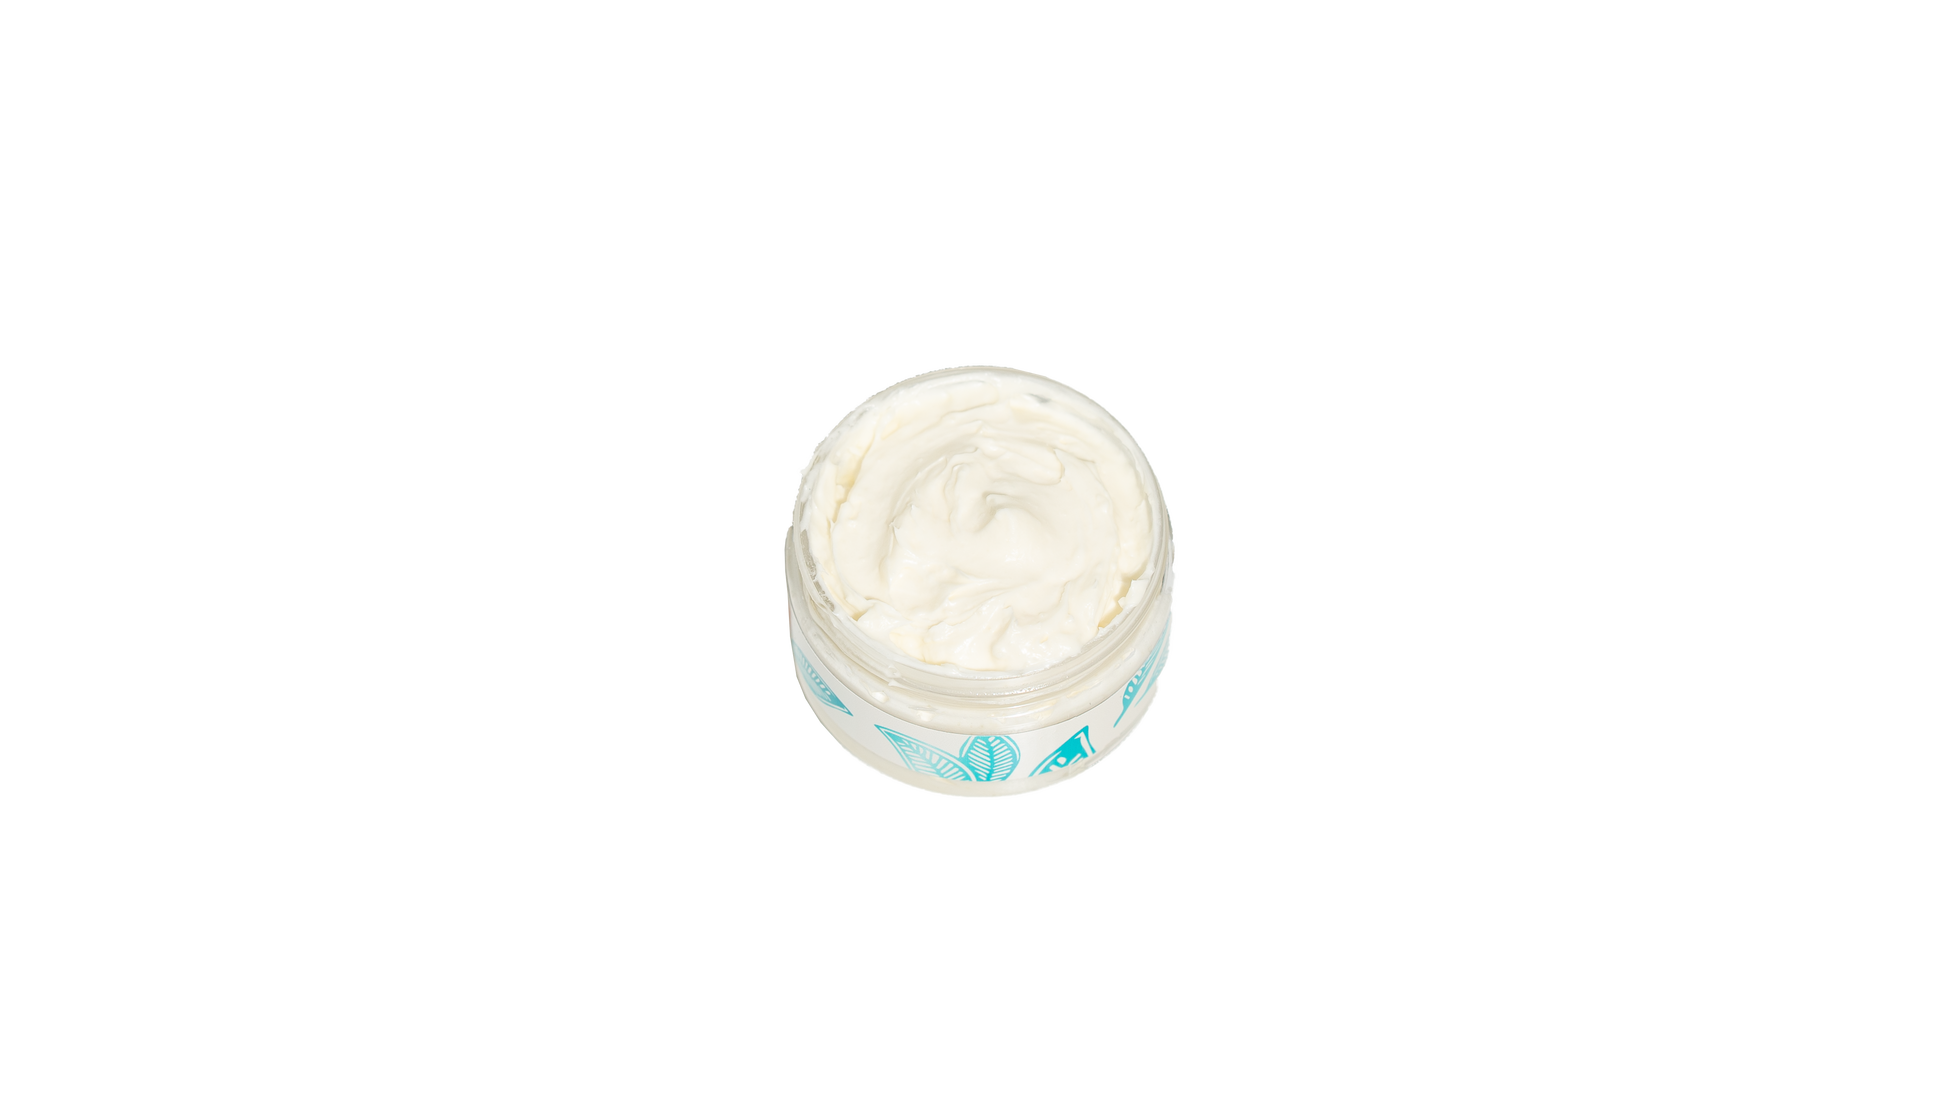  An open 4 oz. jar of Cocoa Bean body butter is presented from an overhead view against a transparent background, showcasing its creamy, rich texture